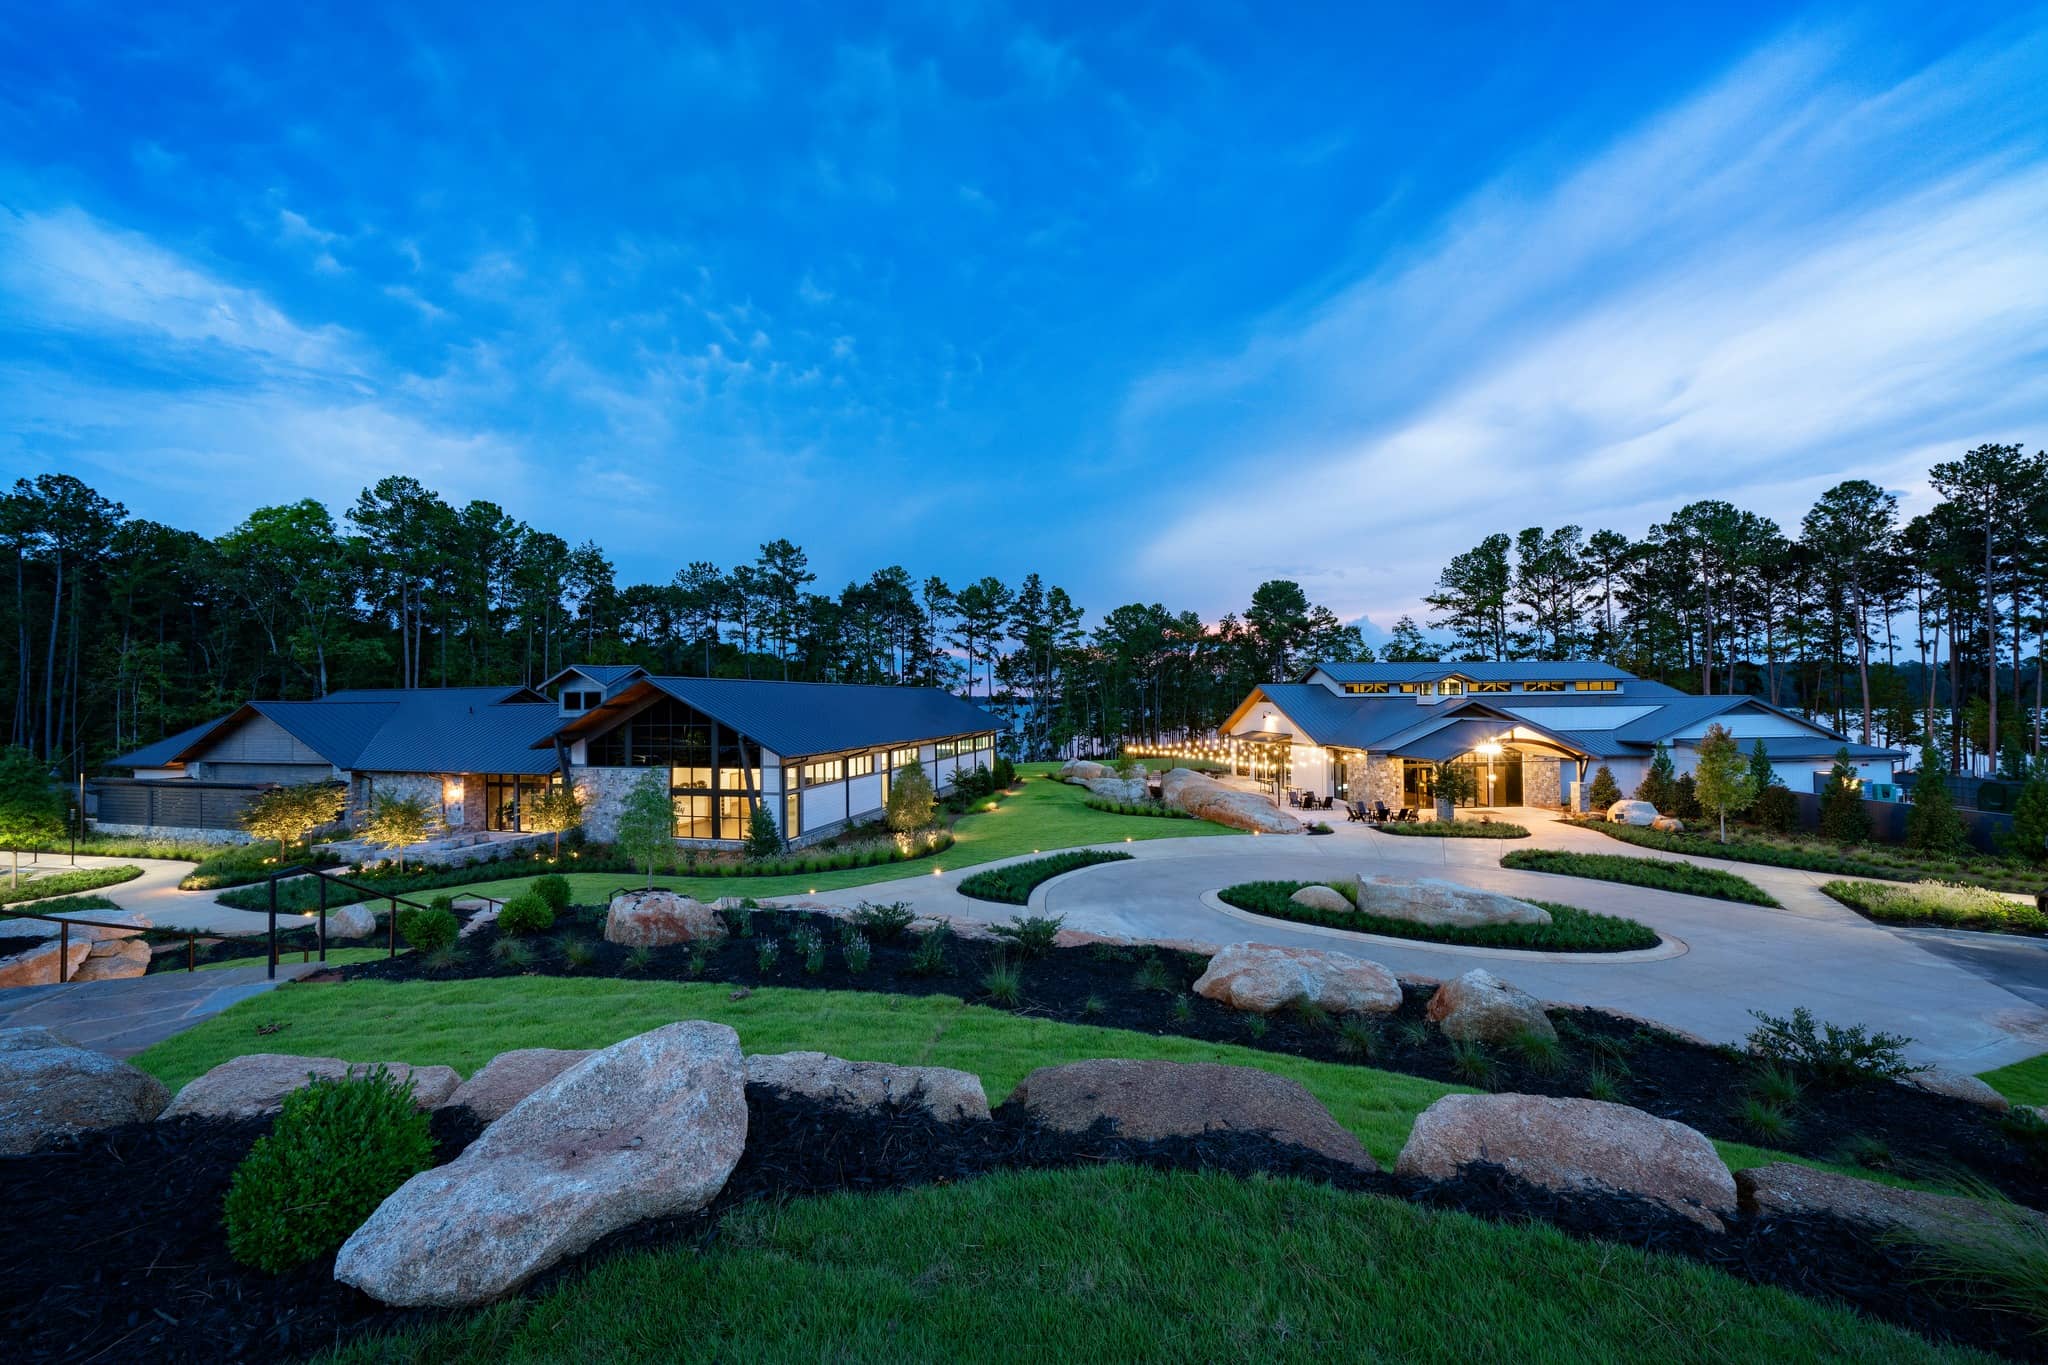 From Golf to Marina: What’s New at Reynolds Lake Oconee’s Richland Pointe